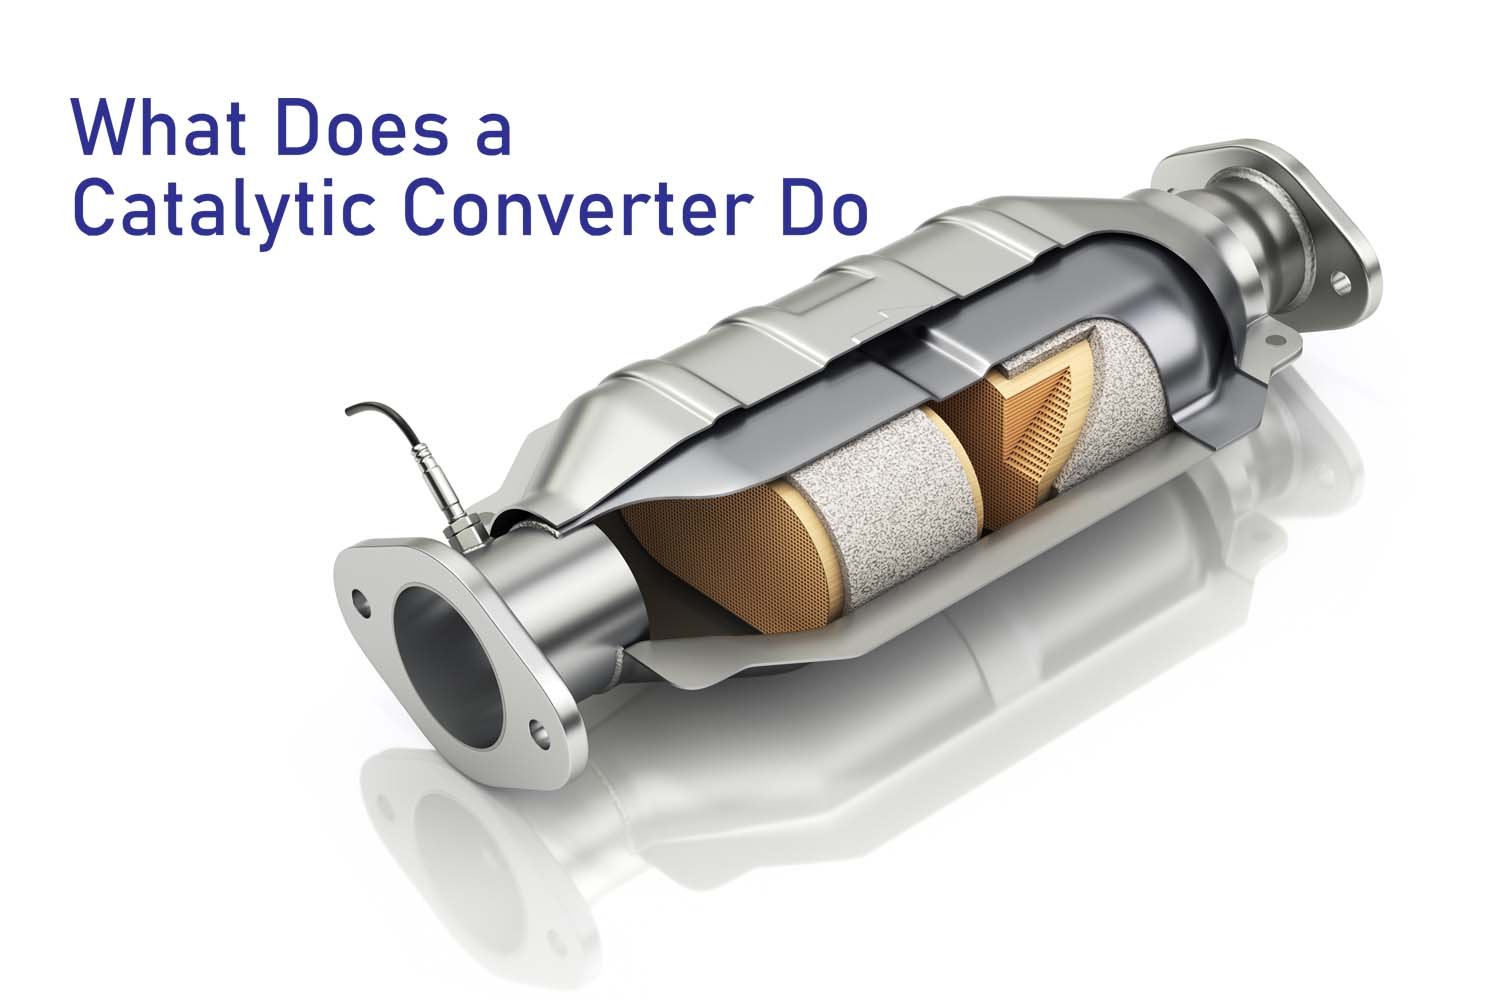 What Does a Catalytic Converter Do